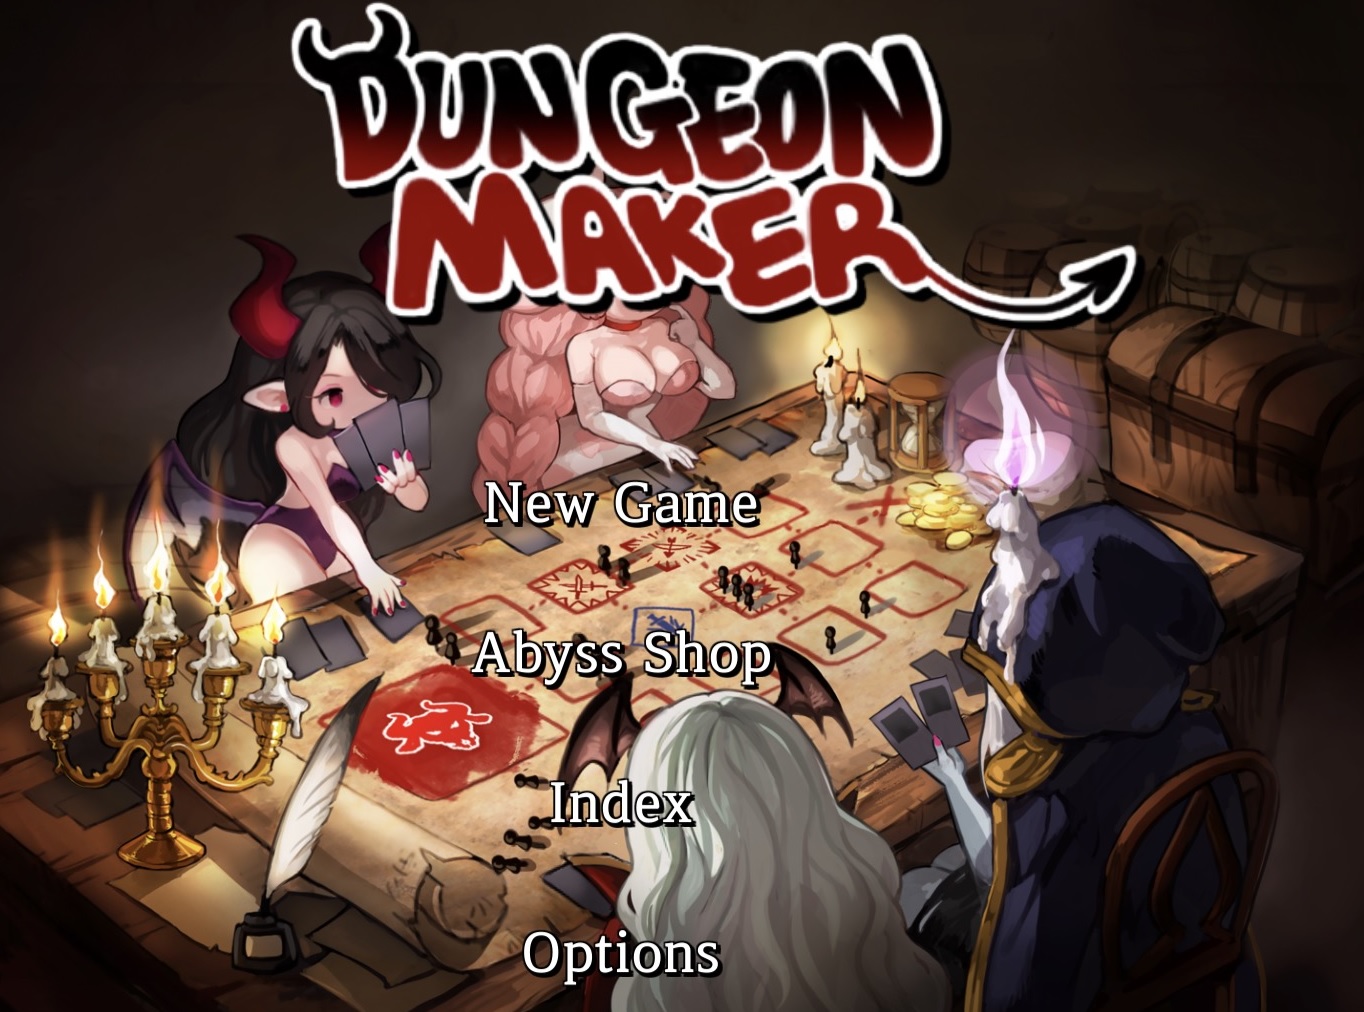 Dungeon Maker: Dark Lord is on sale now